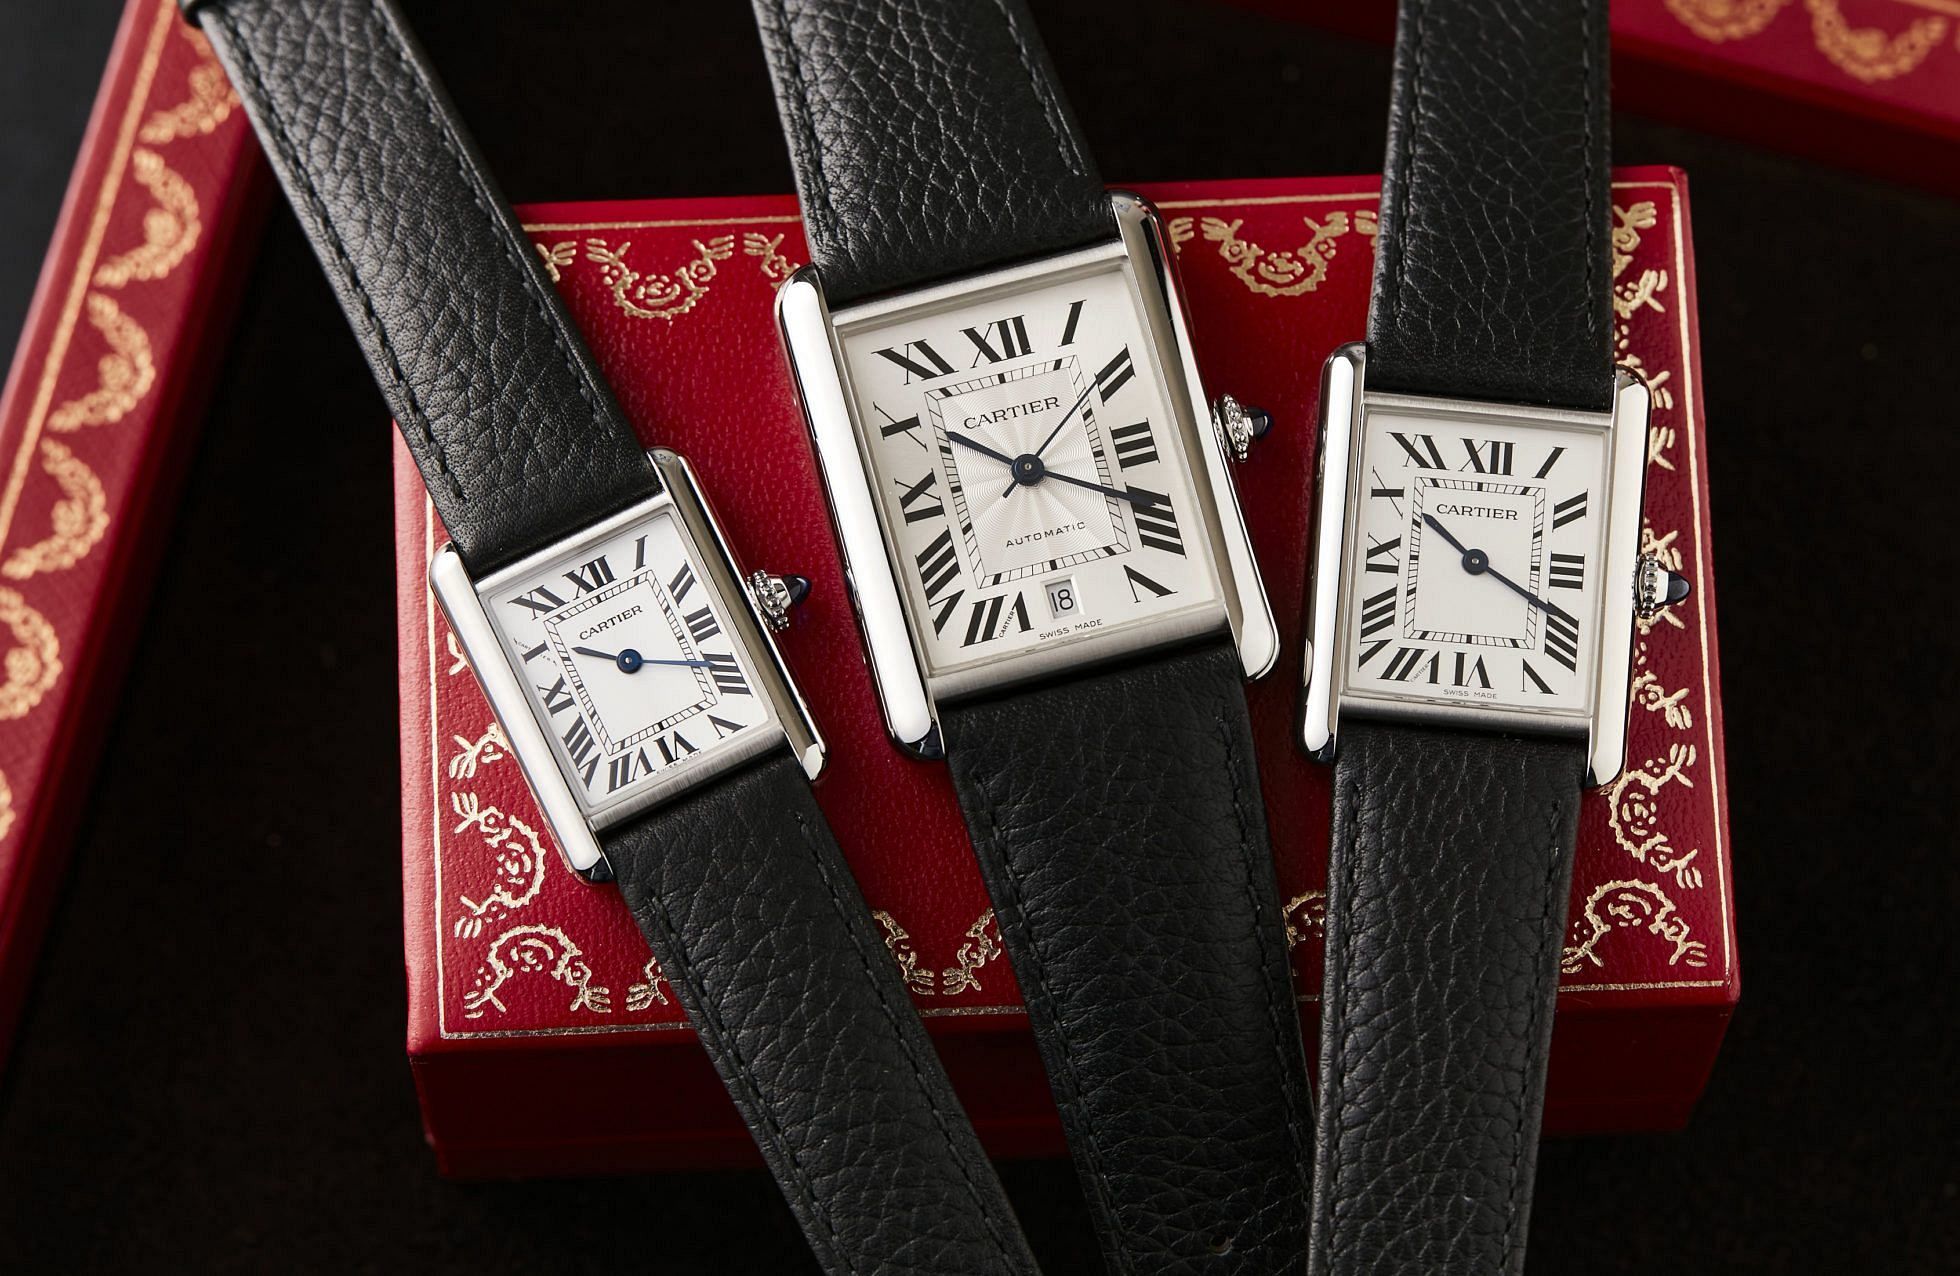 The new adventures of the Cartier Tank include a solar-powered watch